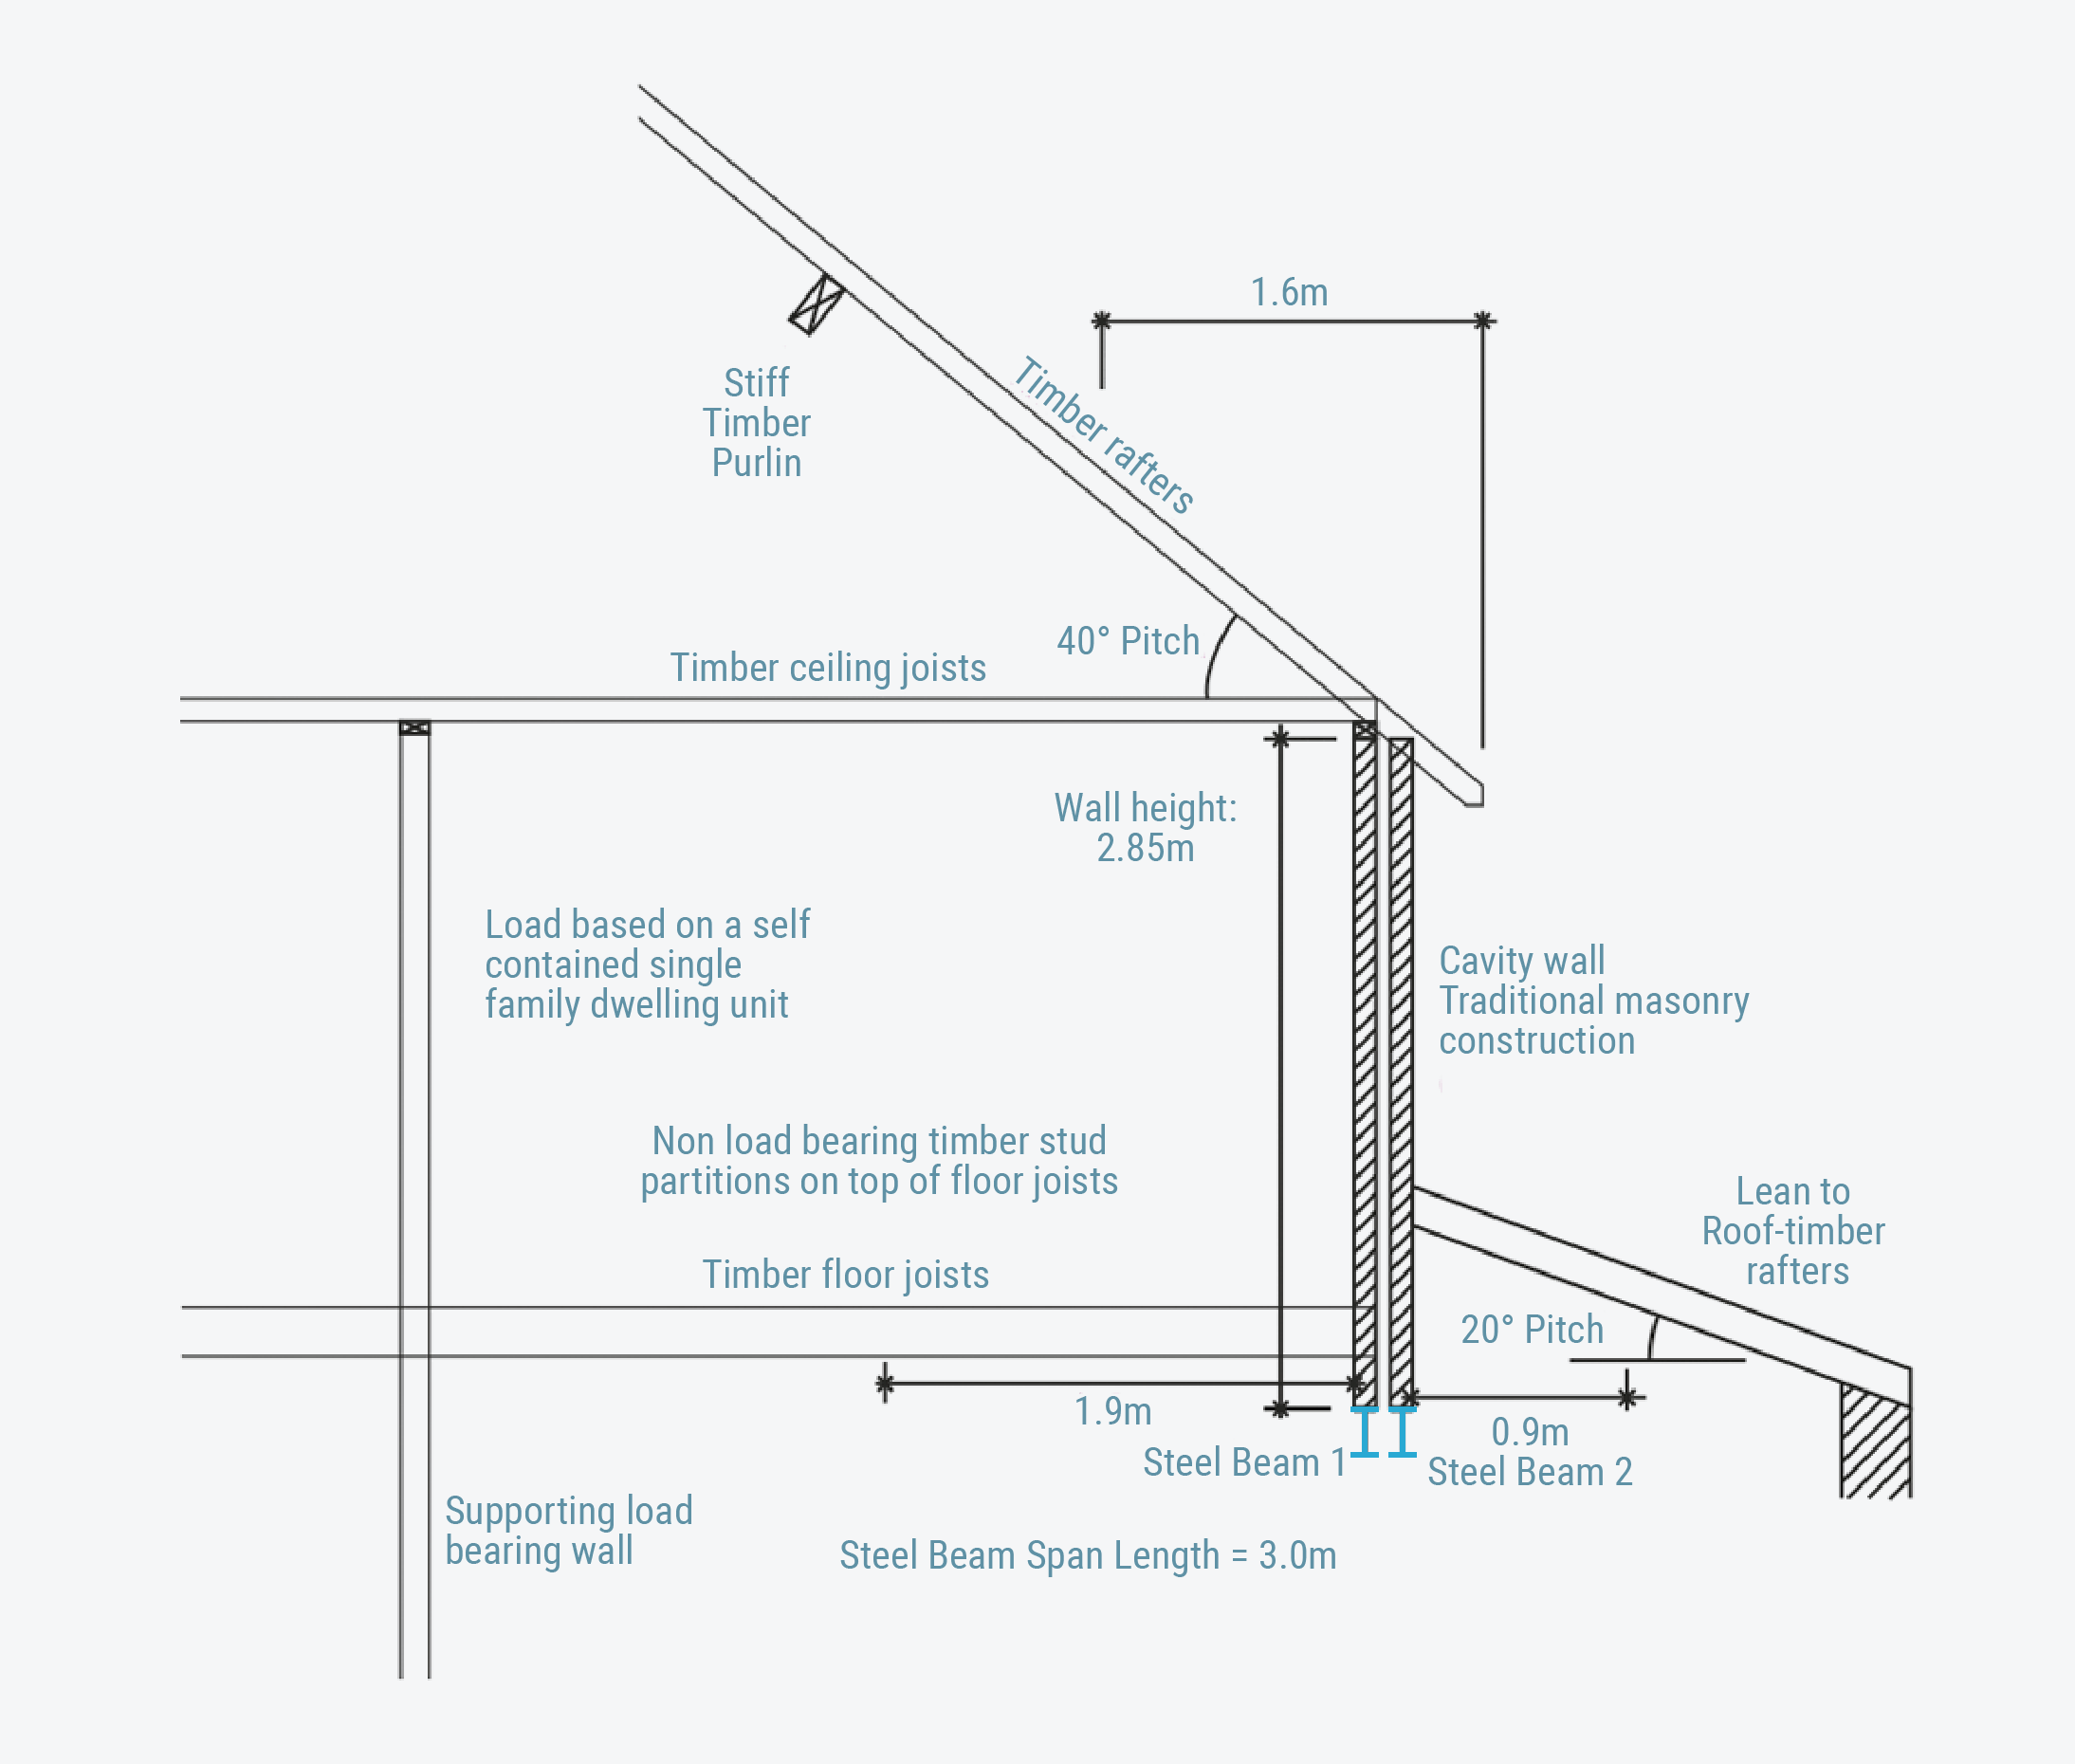 steel beam calculations for steel beams supporting external cavity wall